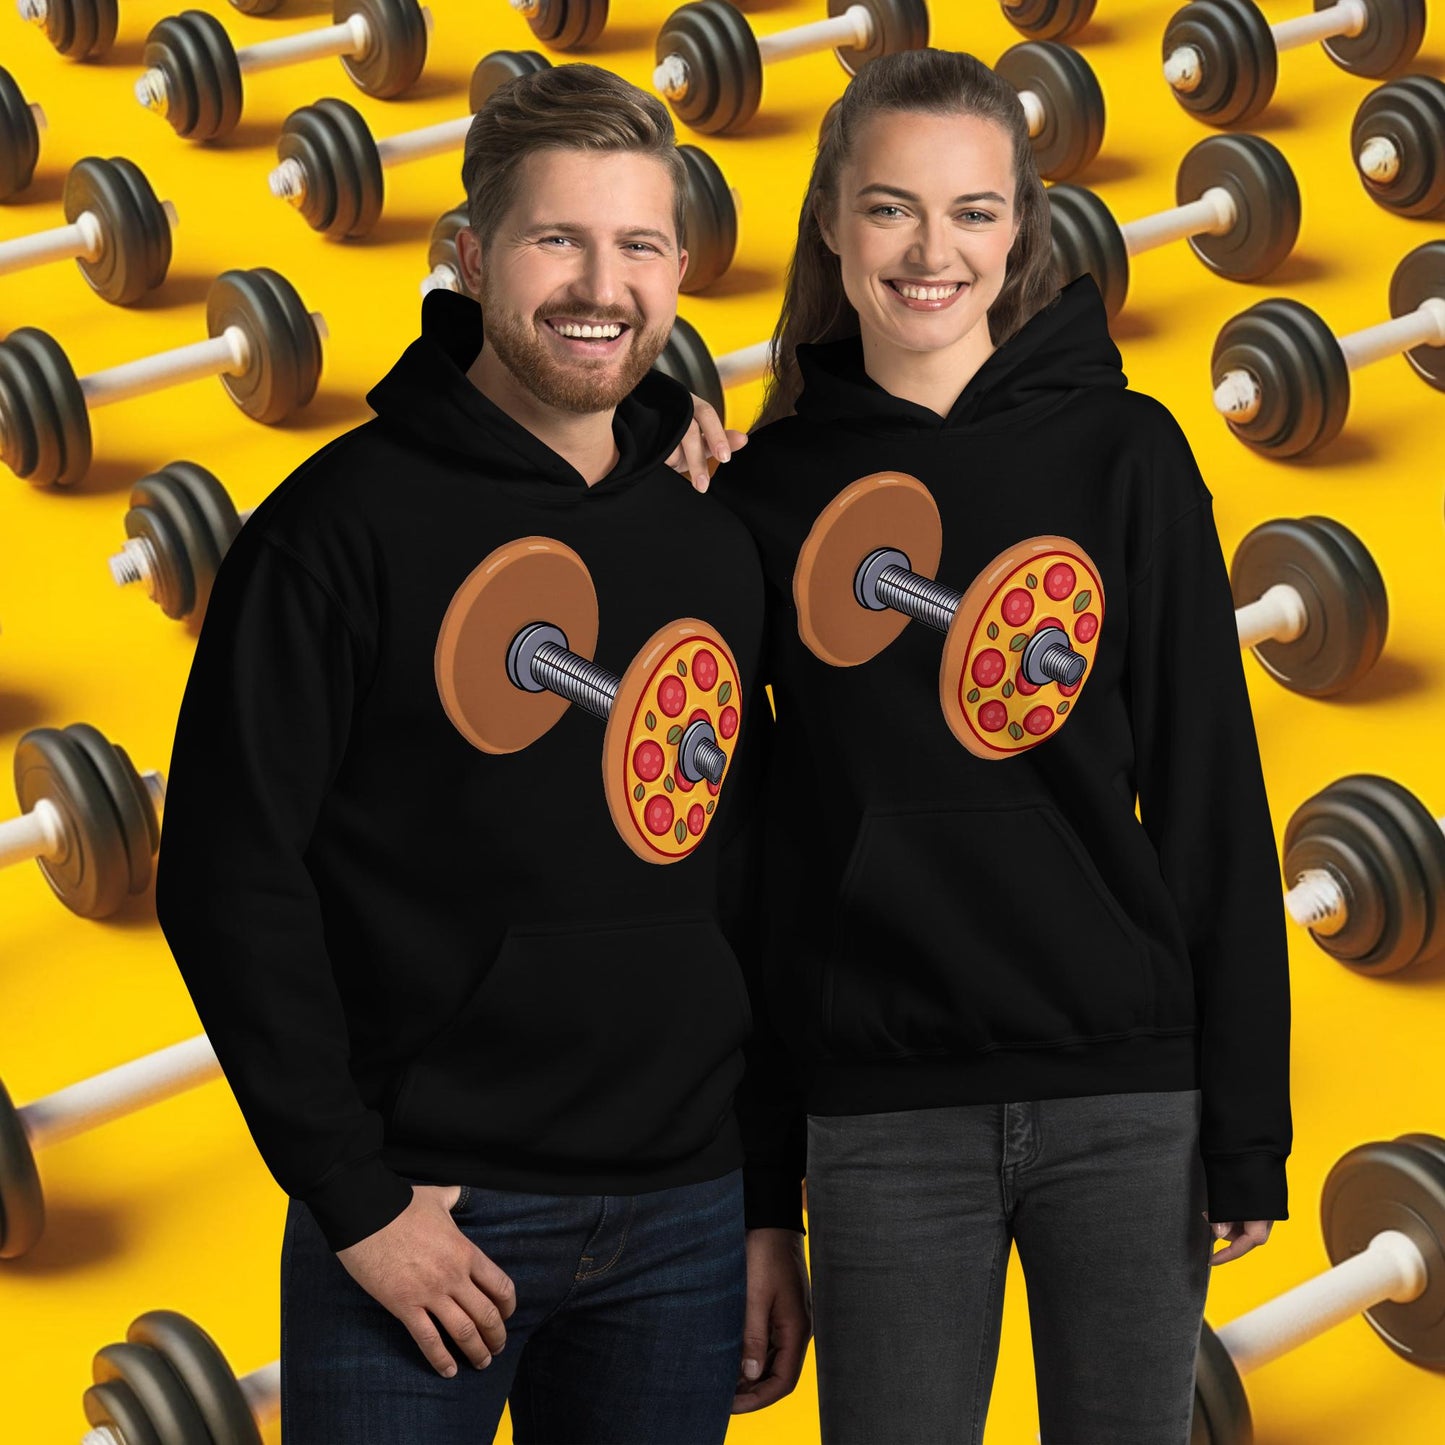 Pizza Dumbbell Barbell Funny Bulk Diet Gym Workout Fitness Weight Lifting Bodybuilding Unisex Hoodie Next Cult Brand